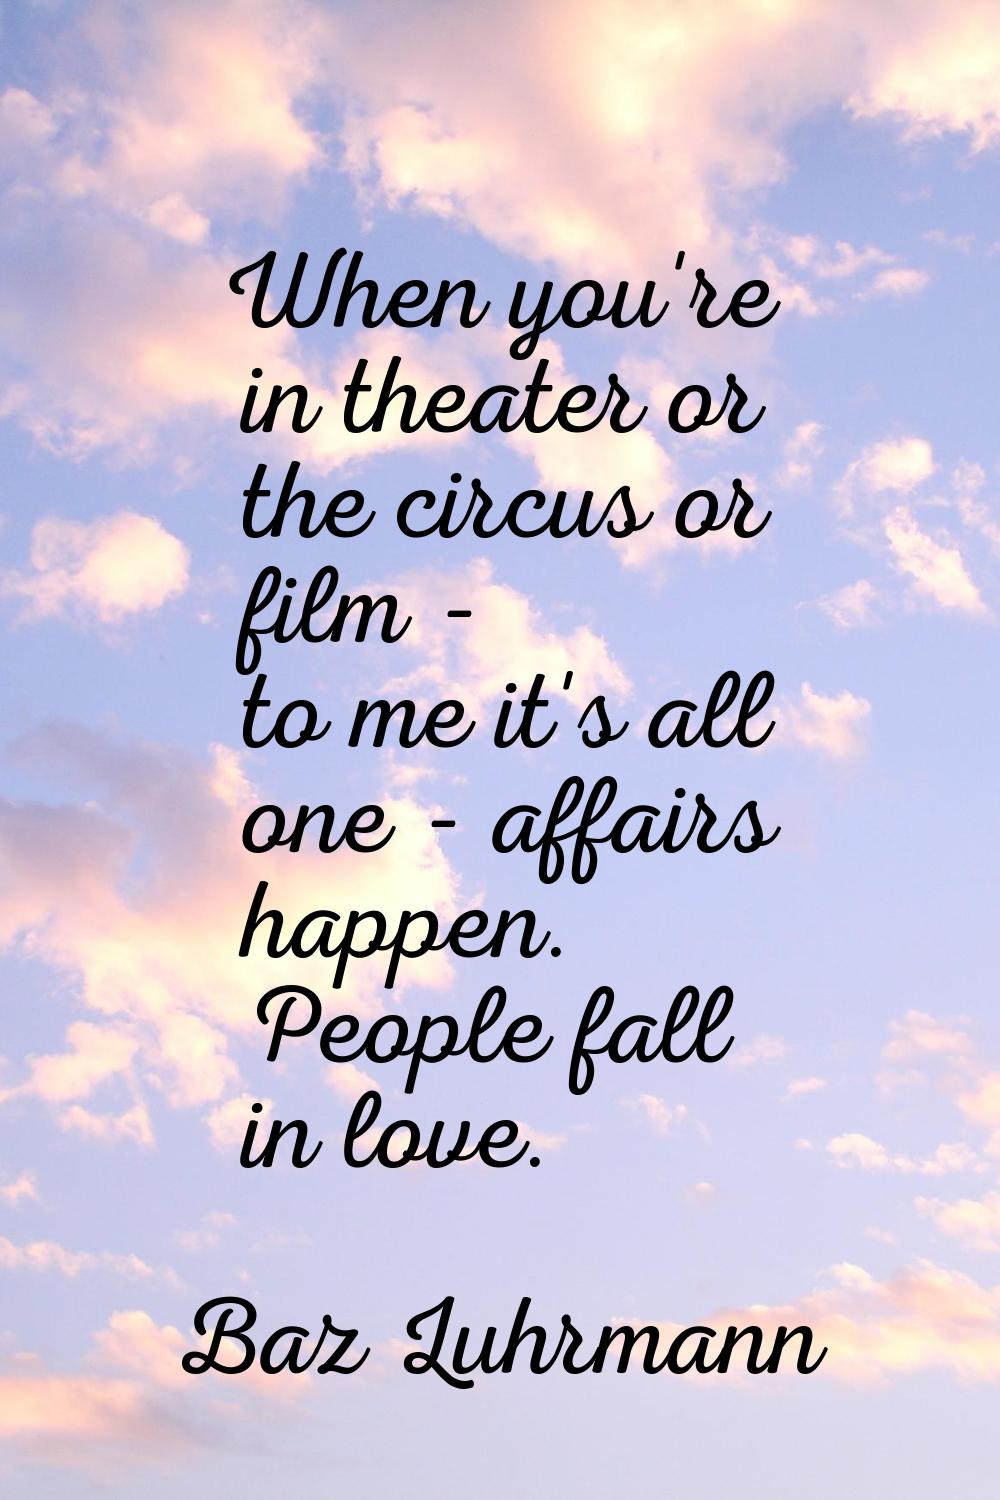 When you're in theater or the circus or film - to me it's all one - affairs happen. People fall in 